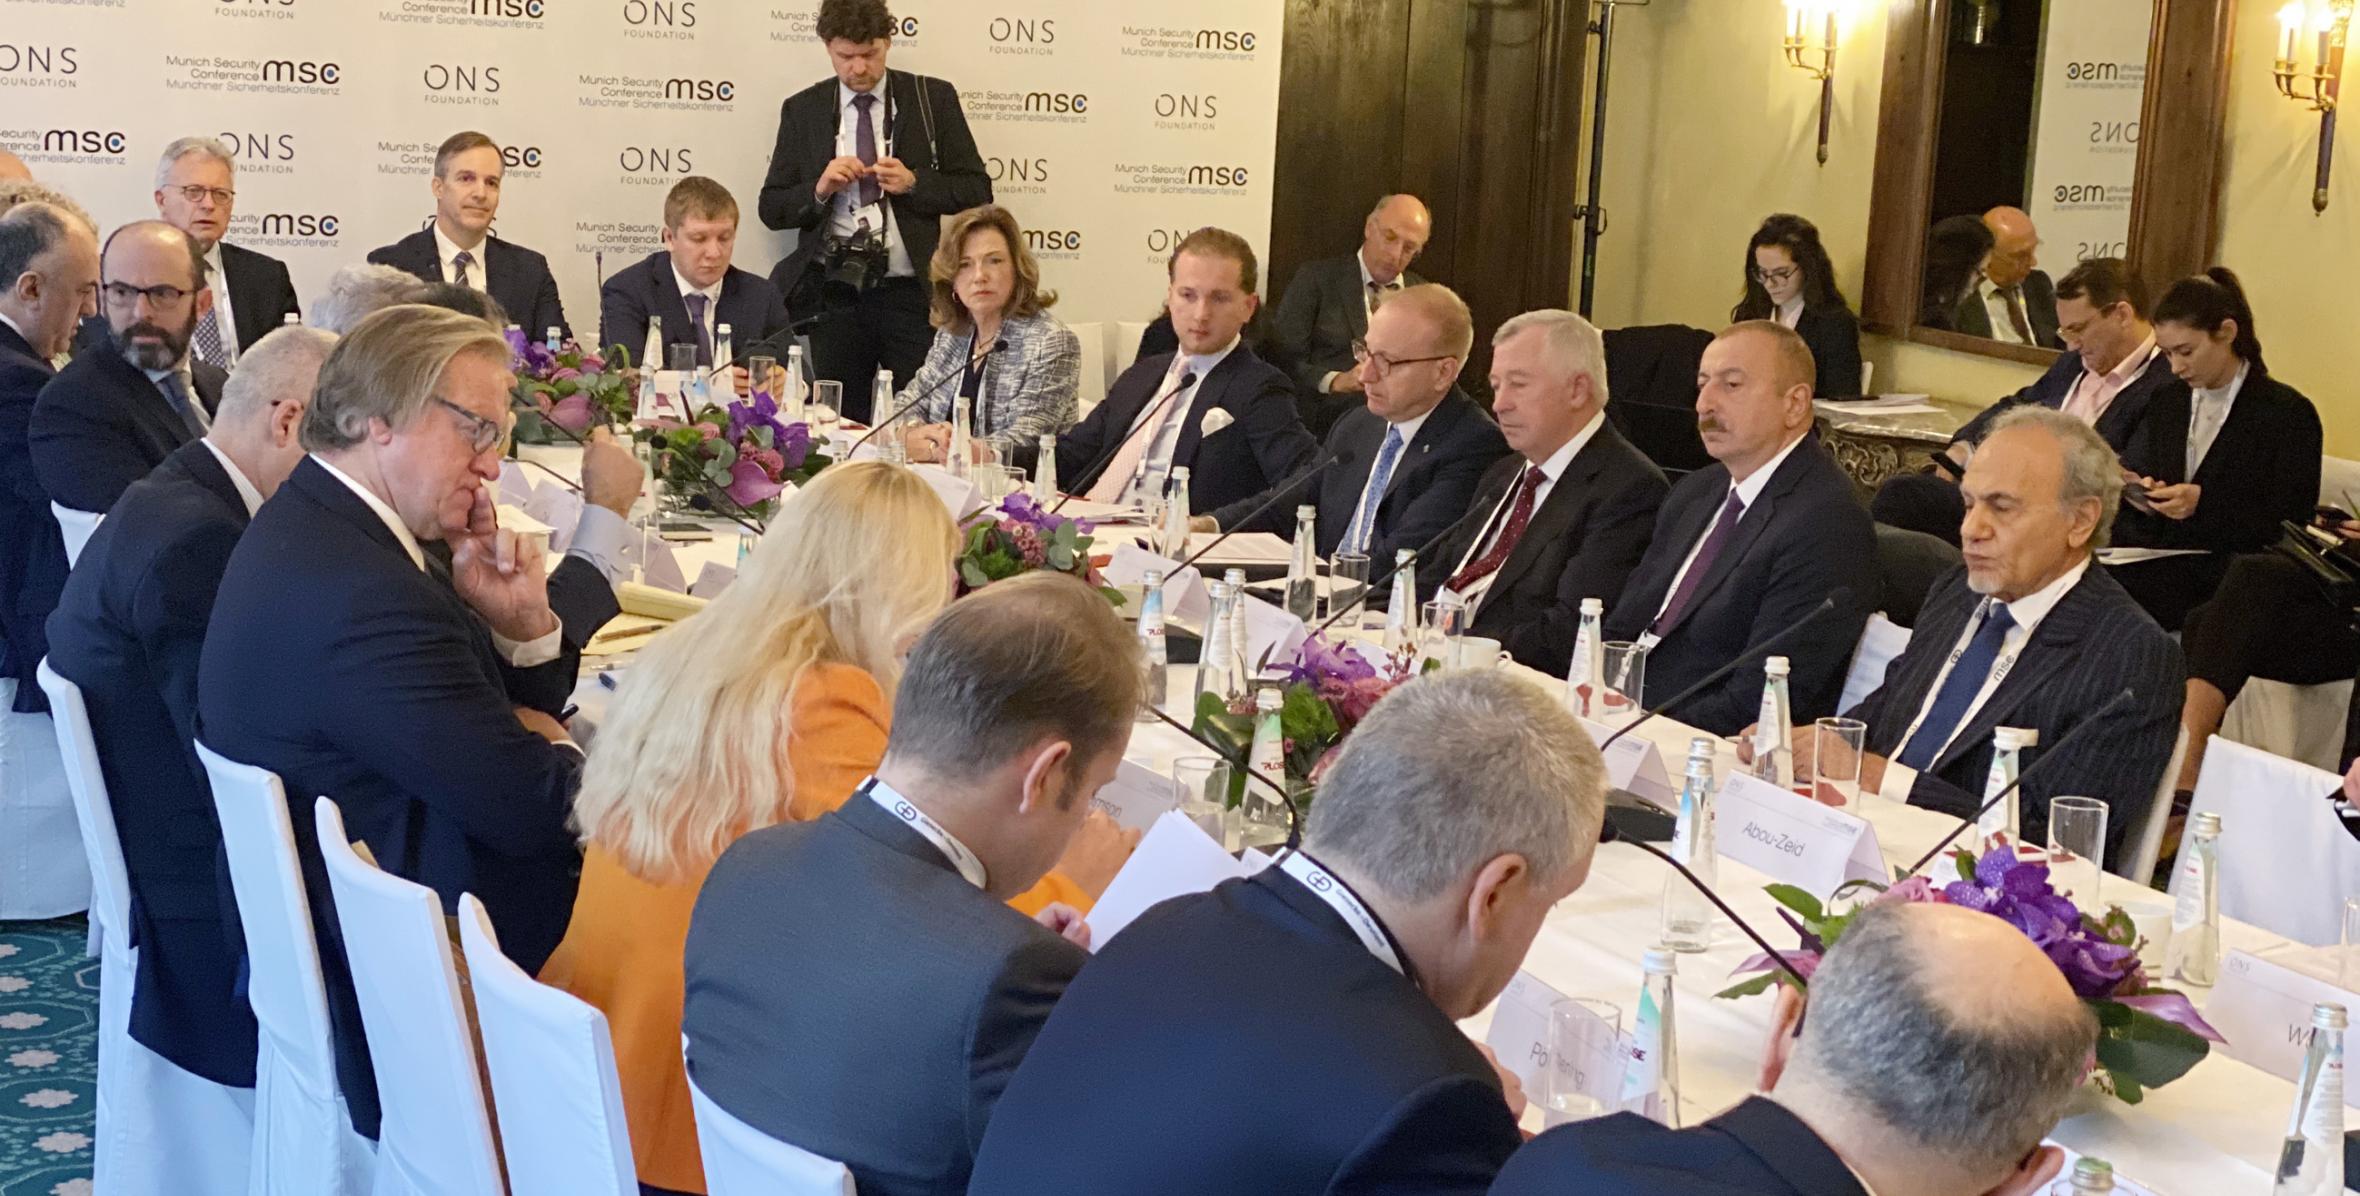 Ilham Aliyev attended Energy Security round table as part of Munich Security Conference